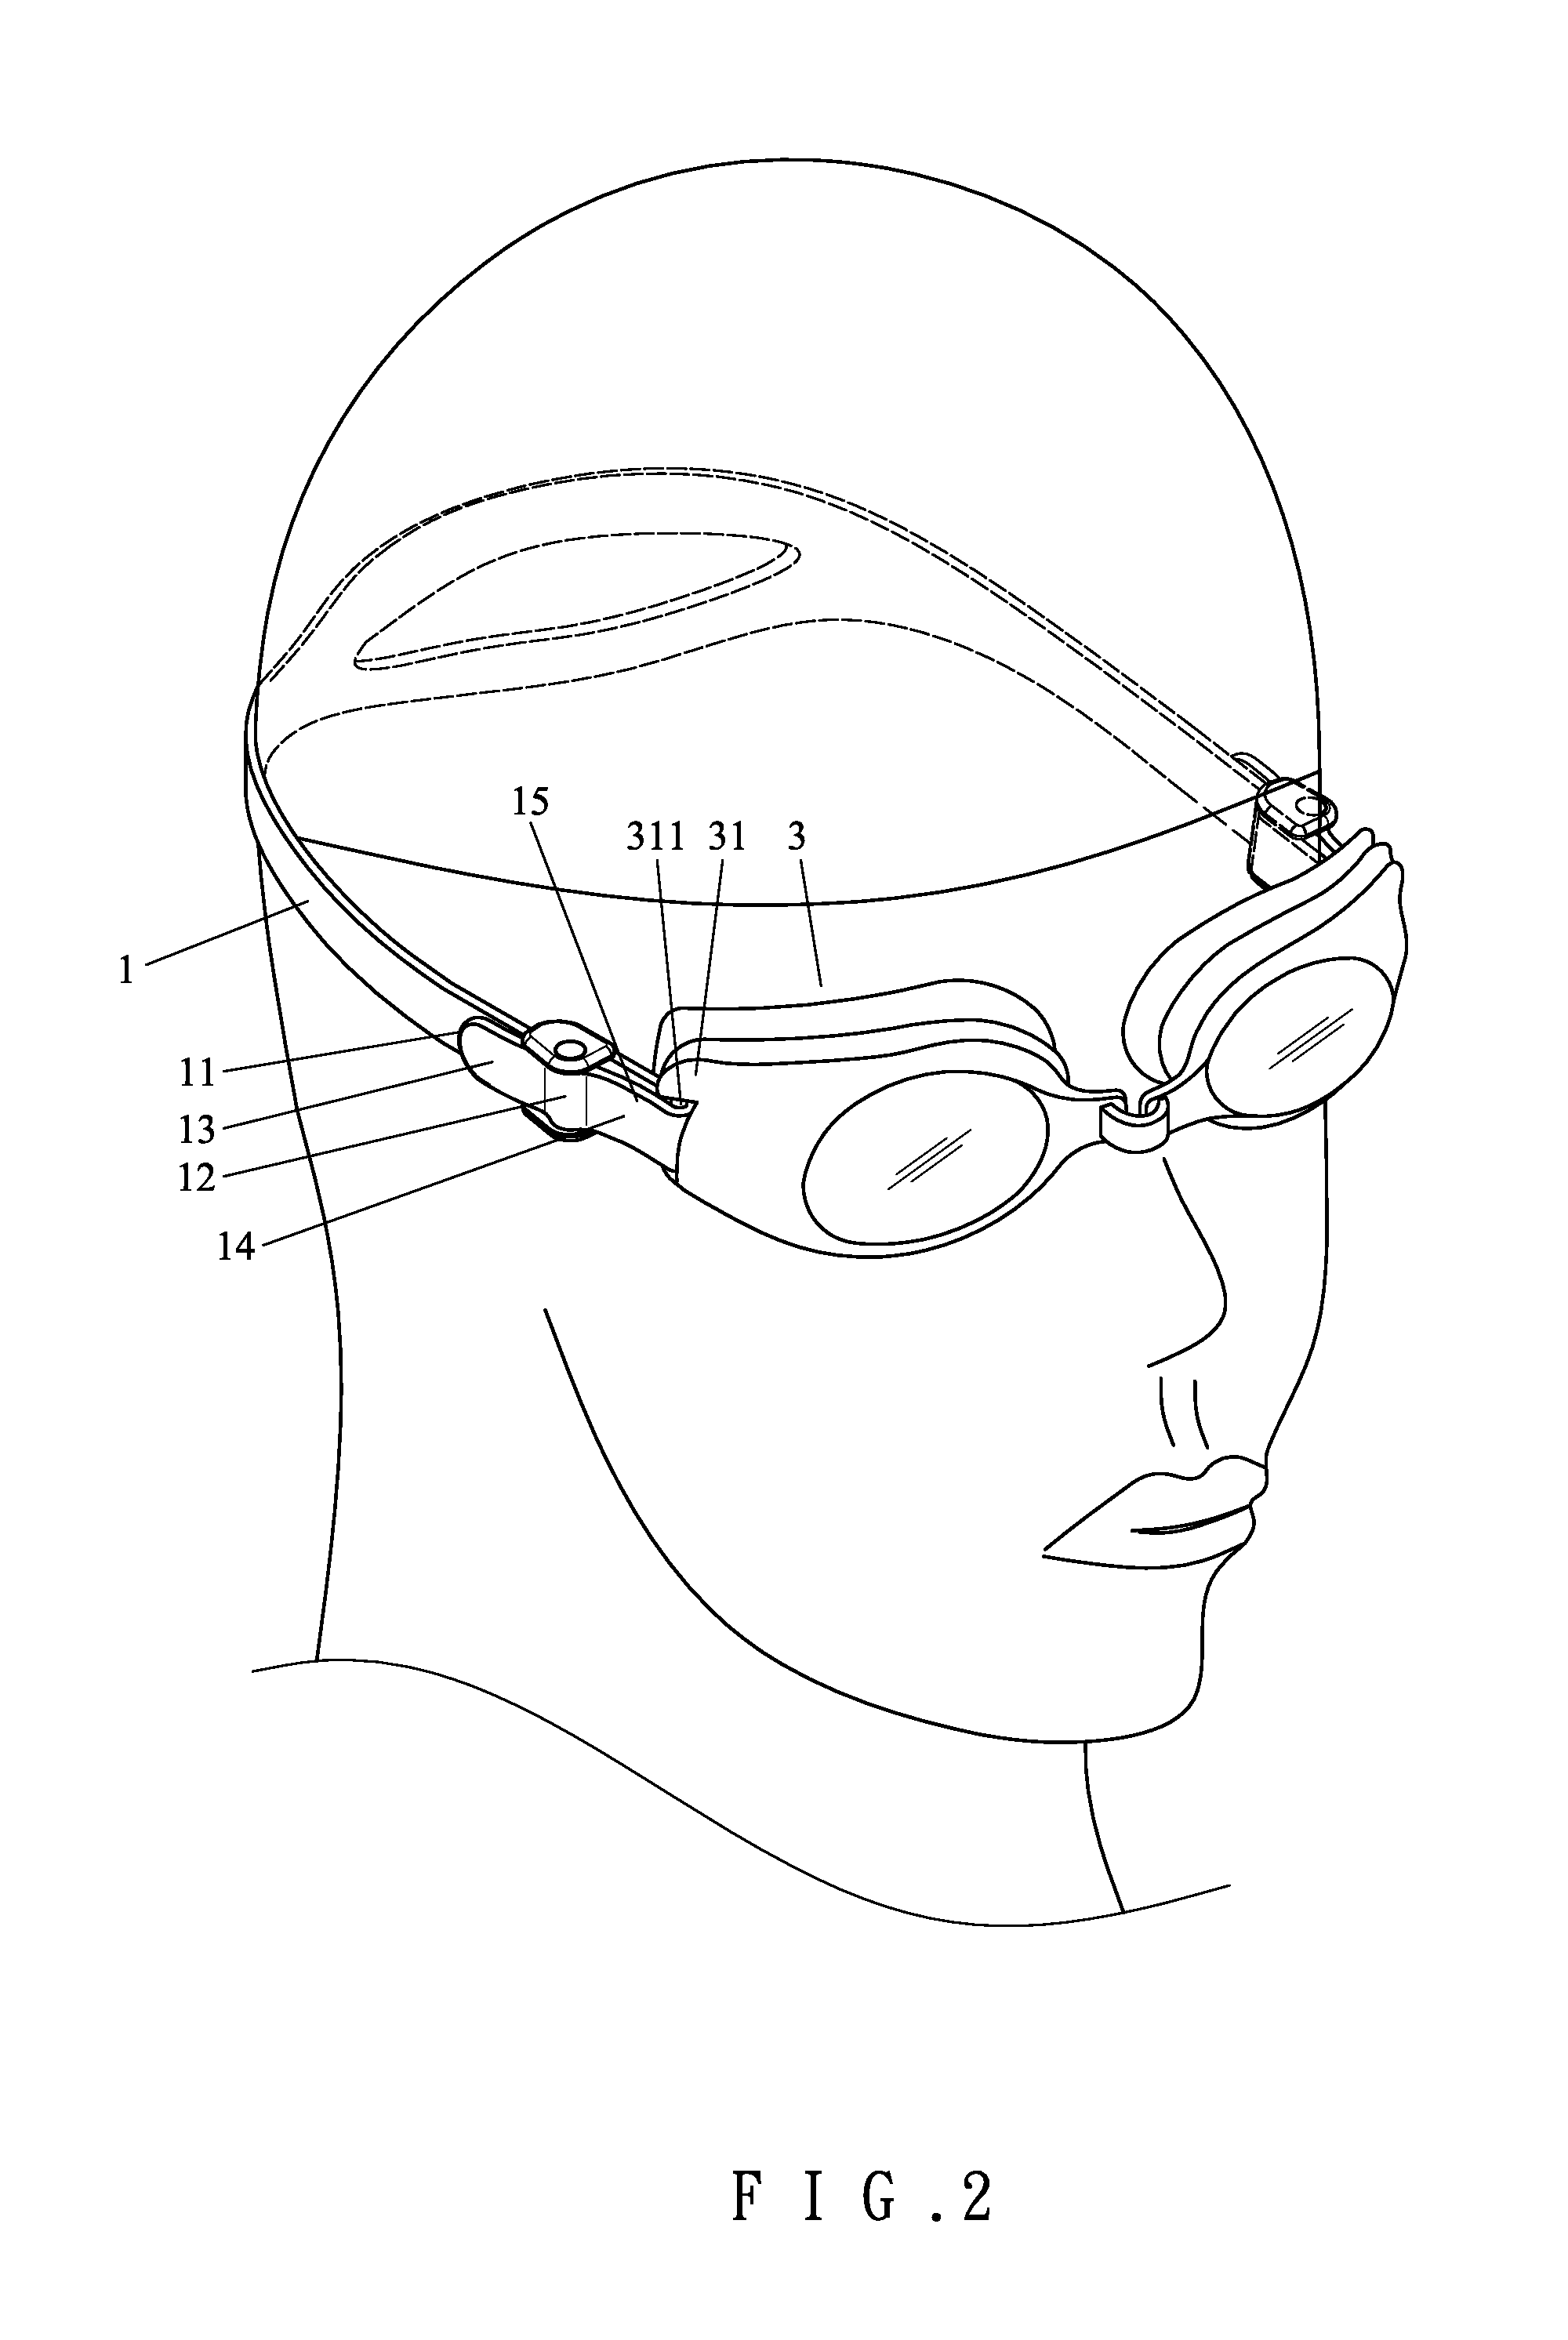 Head strap and buckle device for swimming/diving goggles